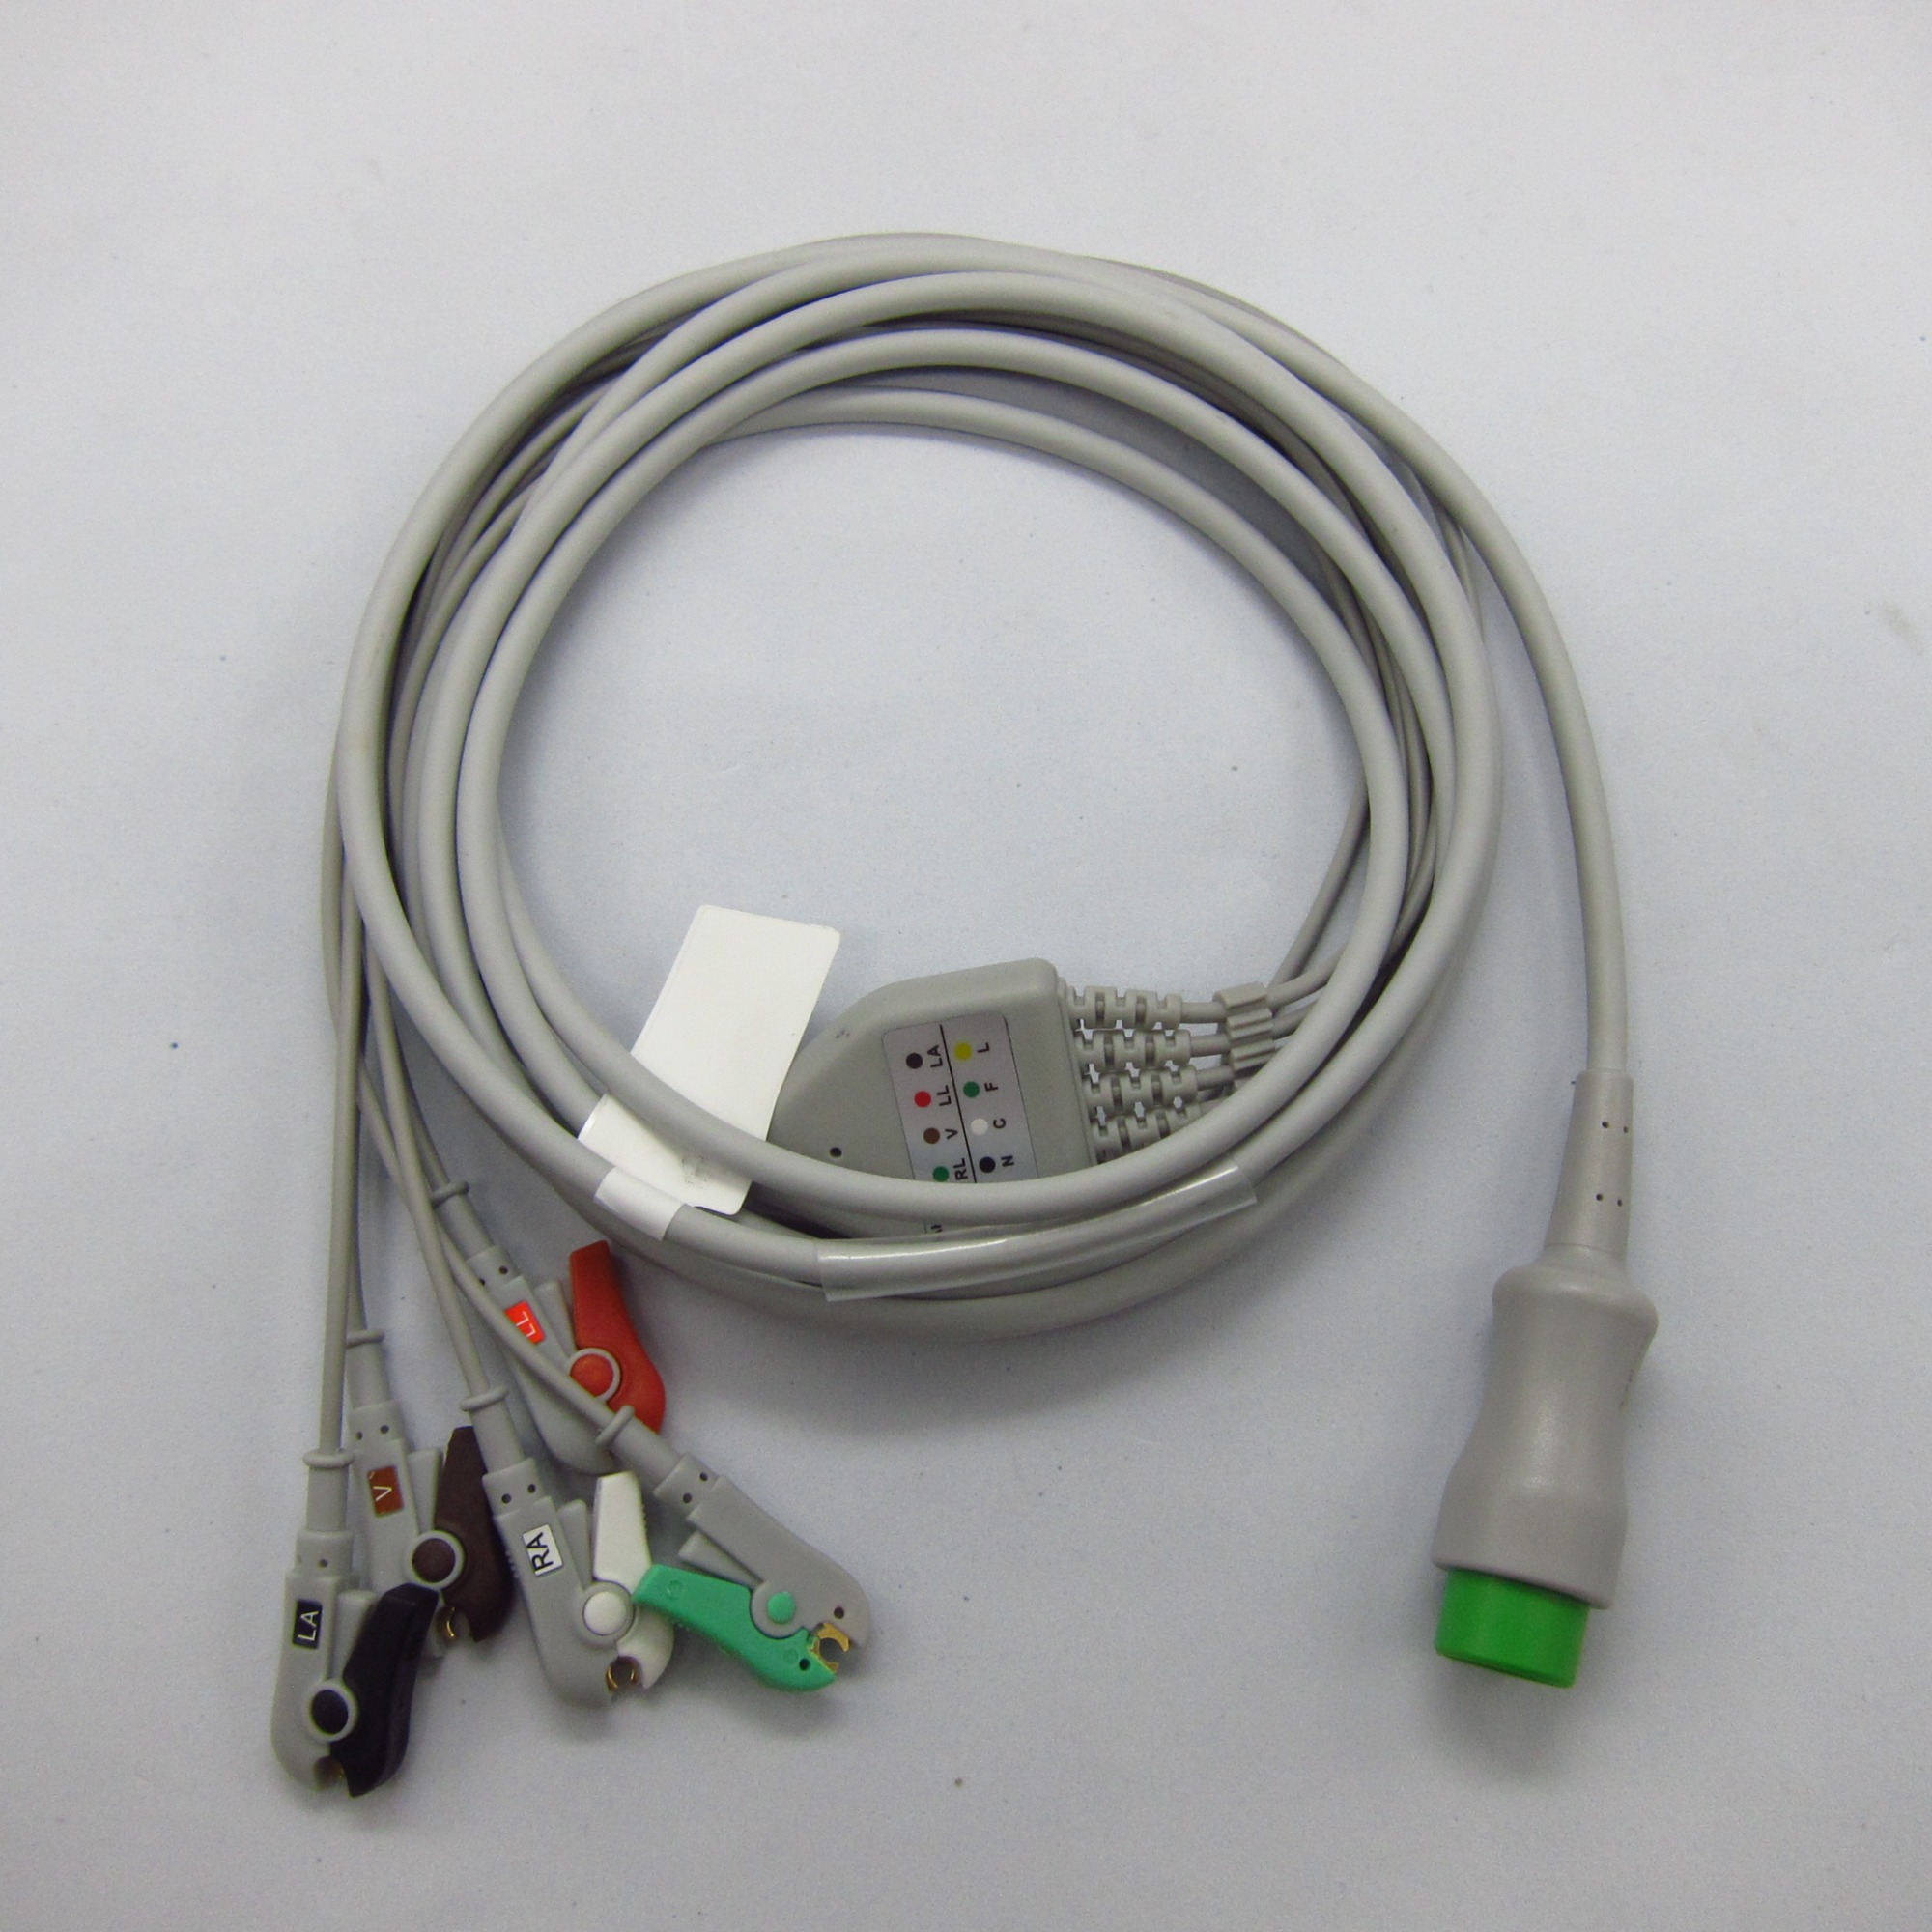 MINDRAY T5/T8 One-piece ECG cable and leadwires for mindray ECG machine